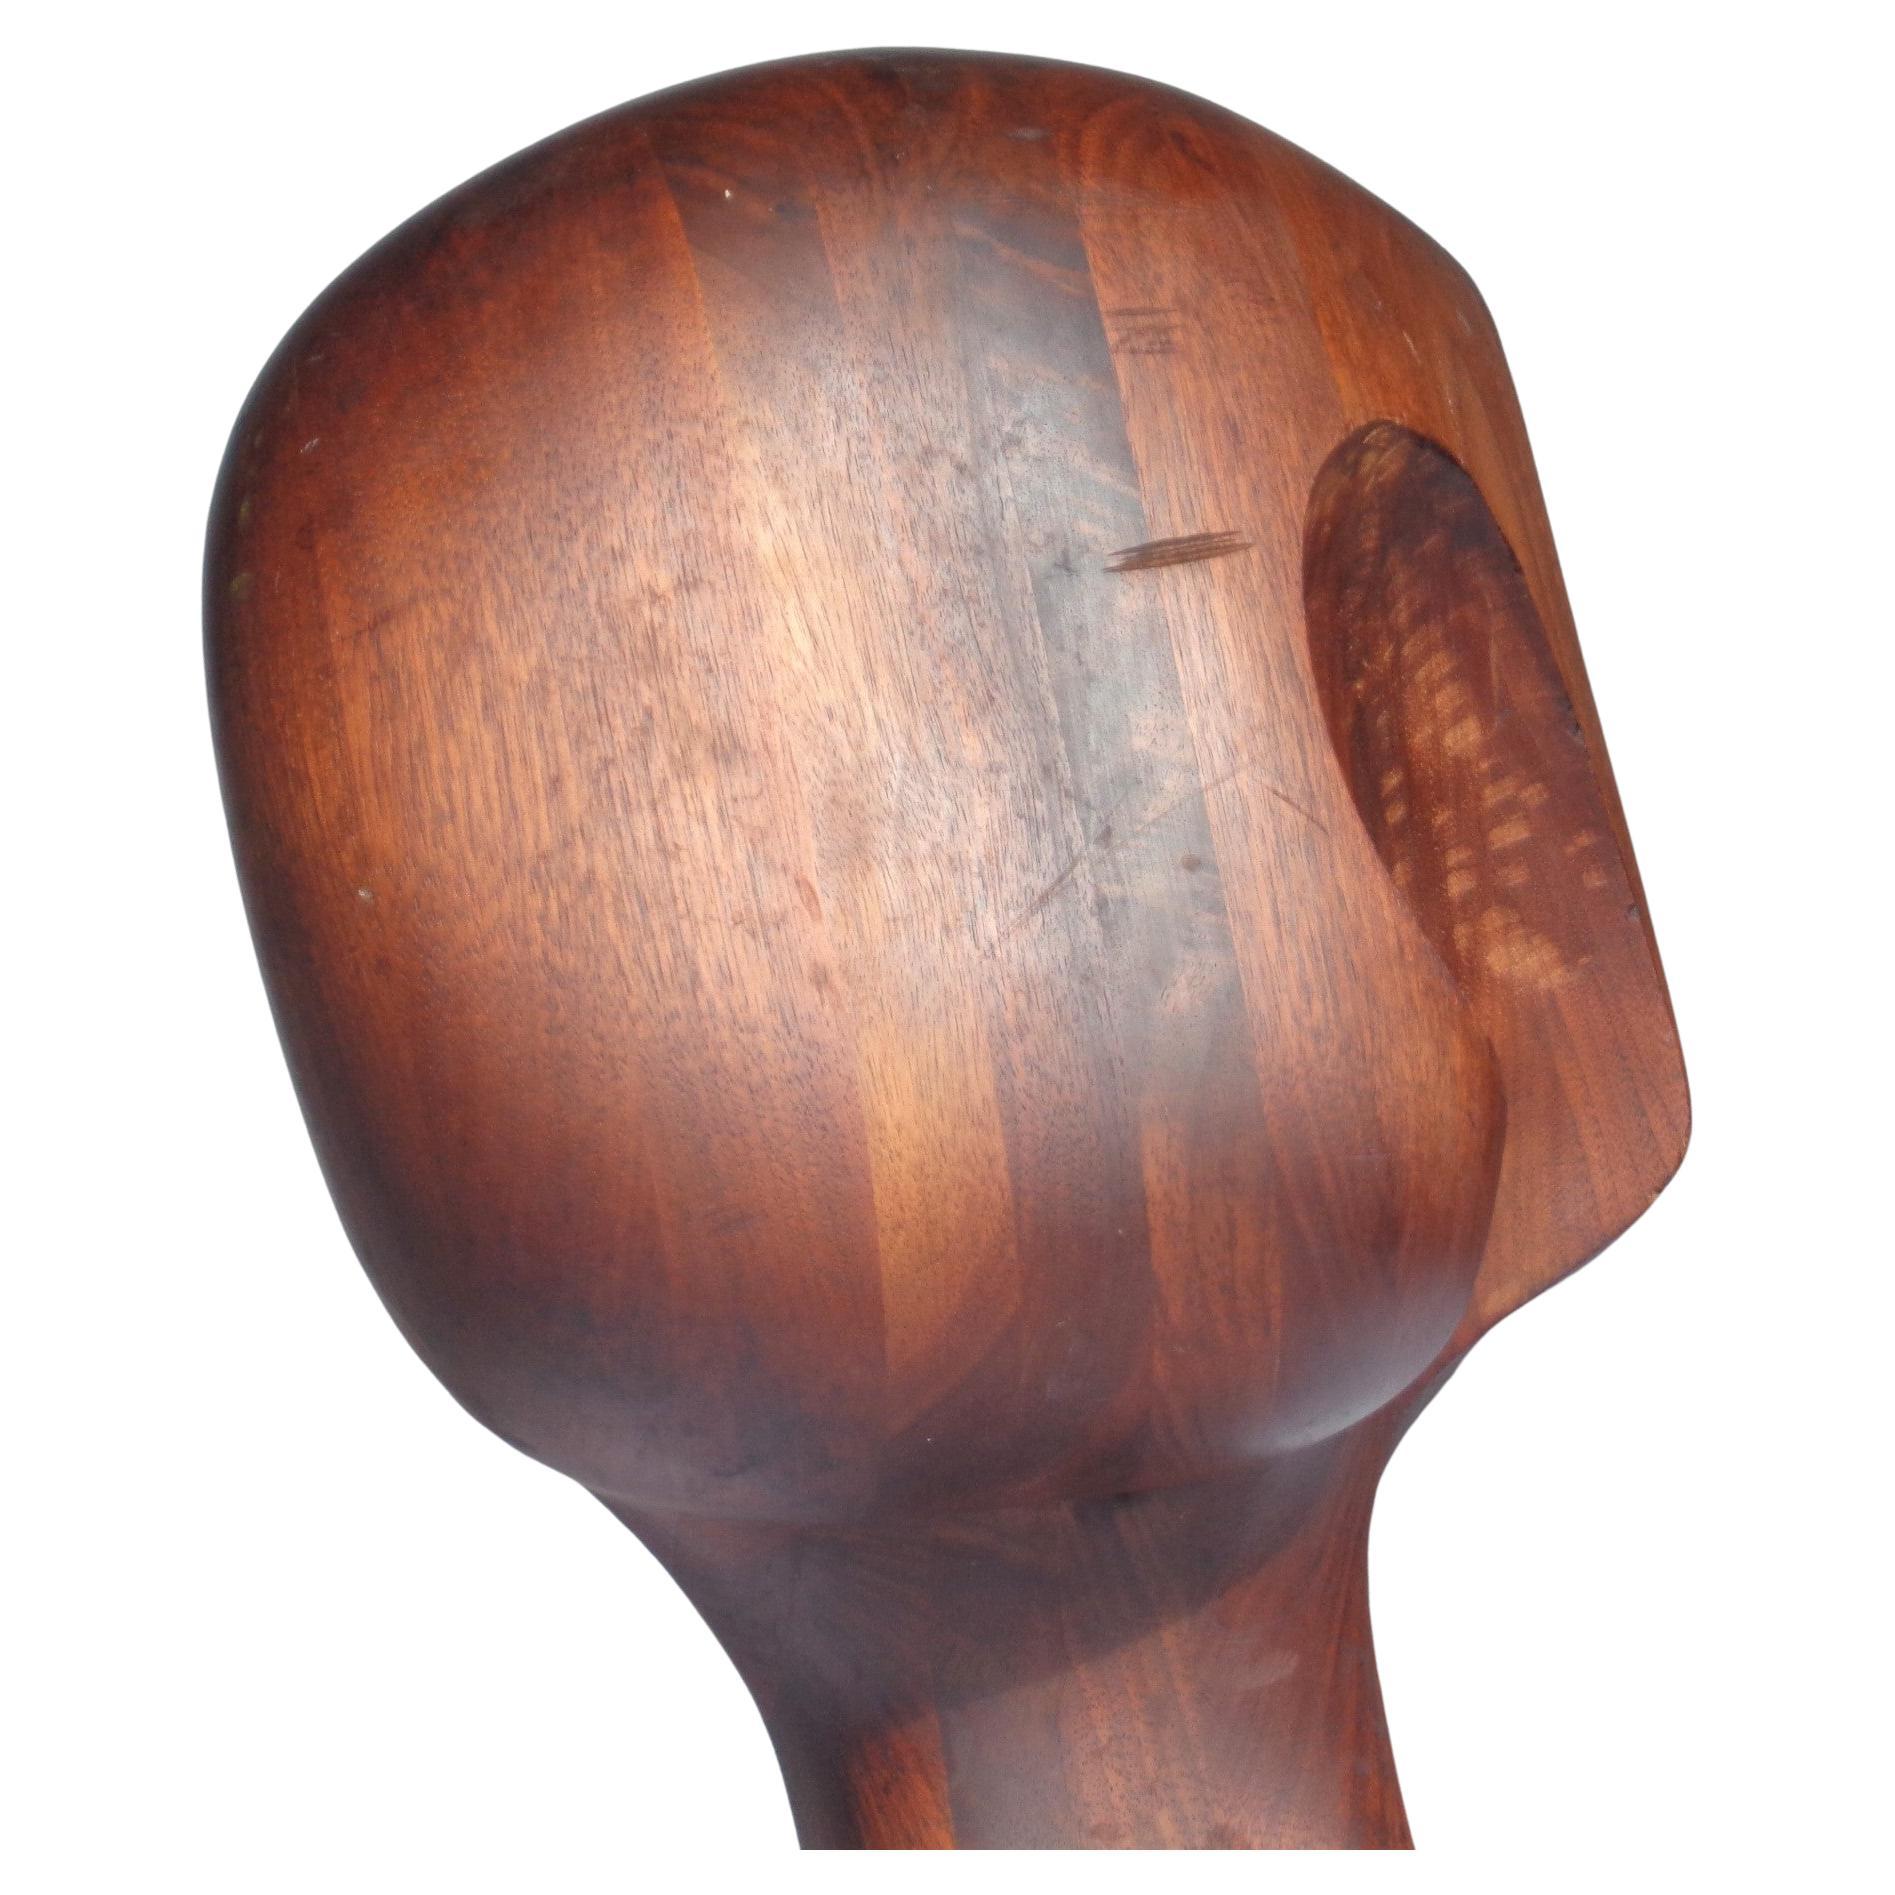 American Studio Craft Movement Abstract Sculpture Wood Bust, 1970-1980 For Sale 1